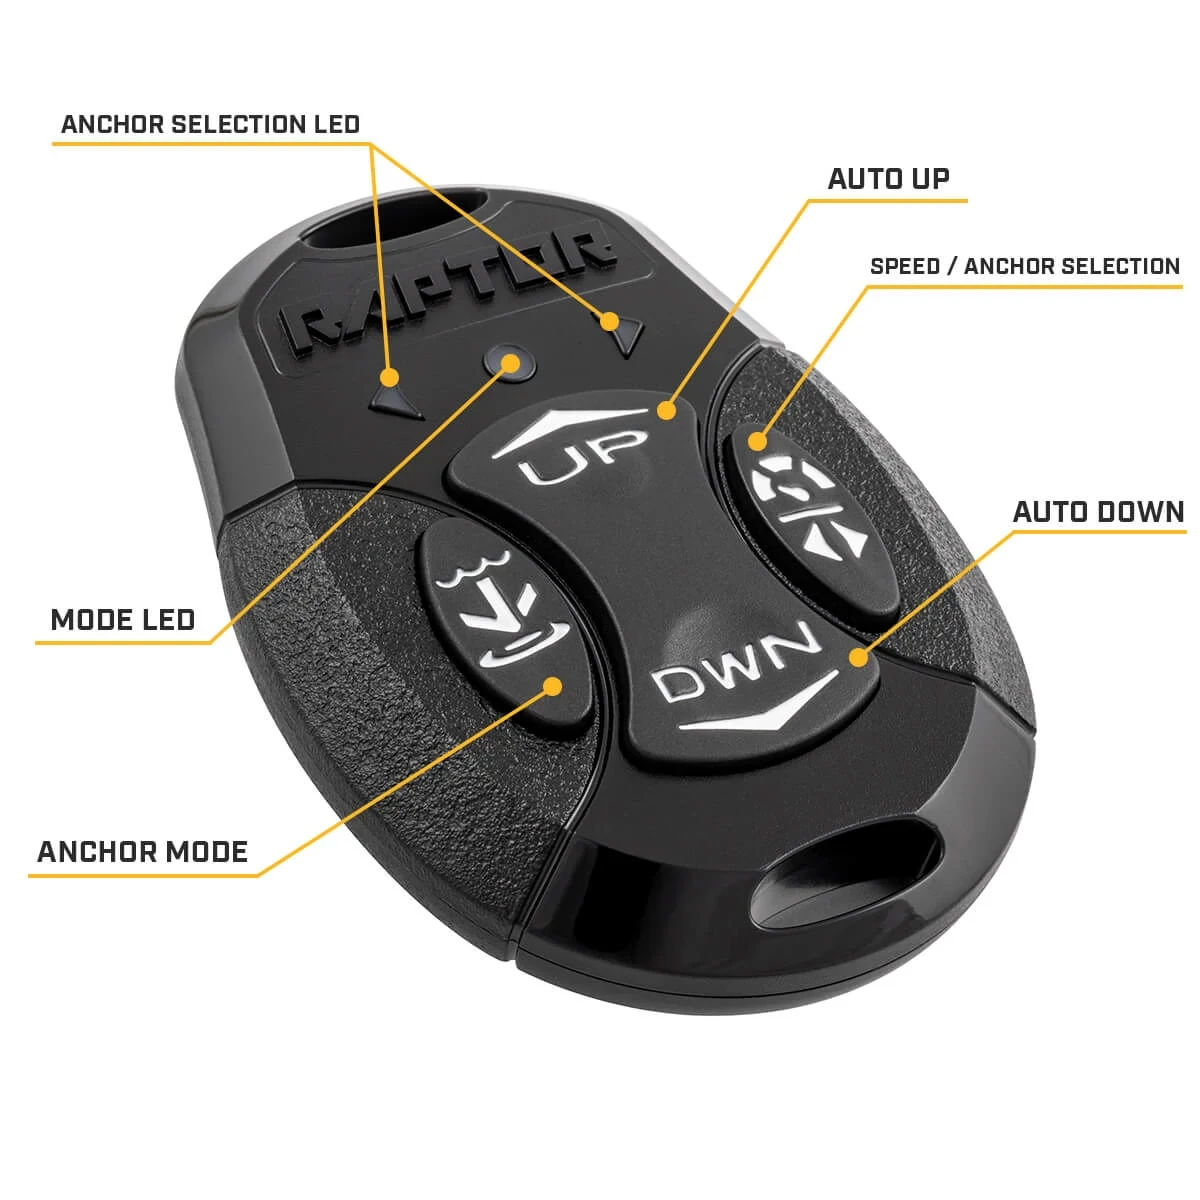 Raptor remote with feature callouts